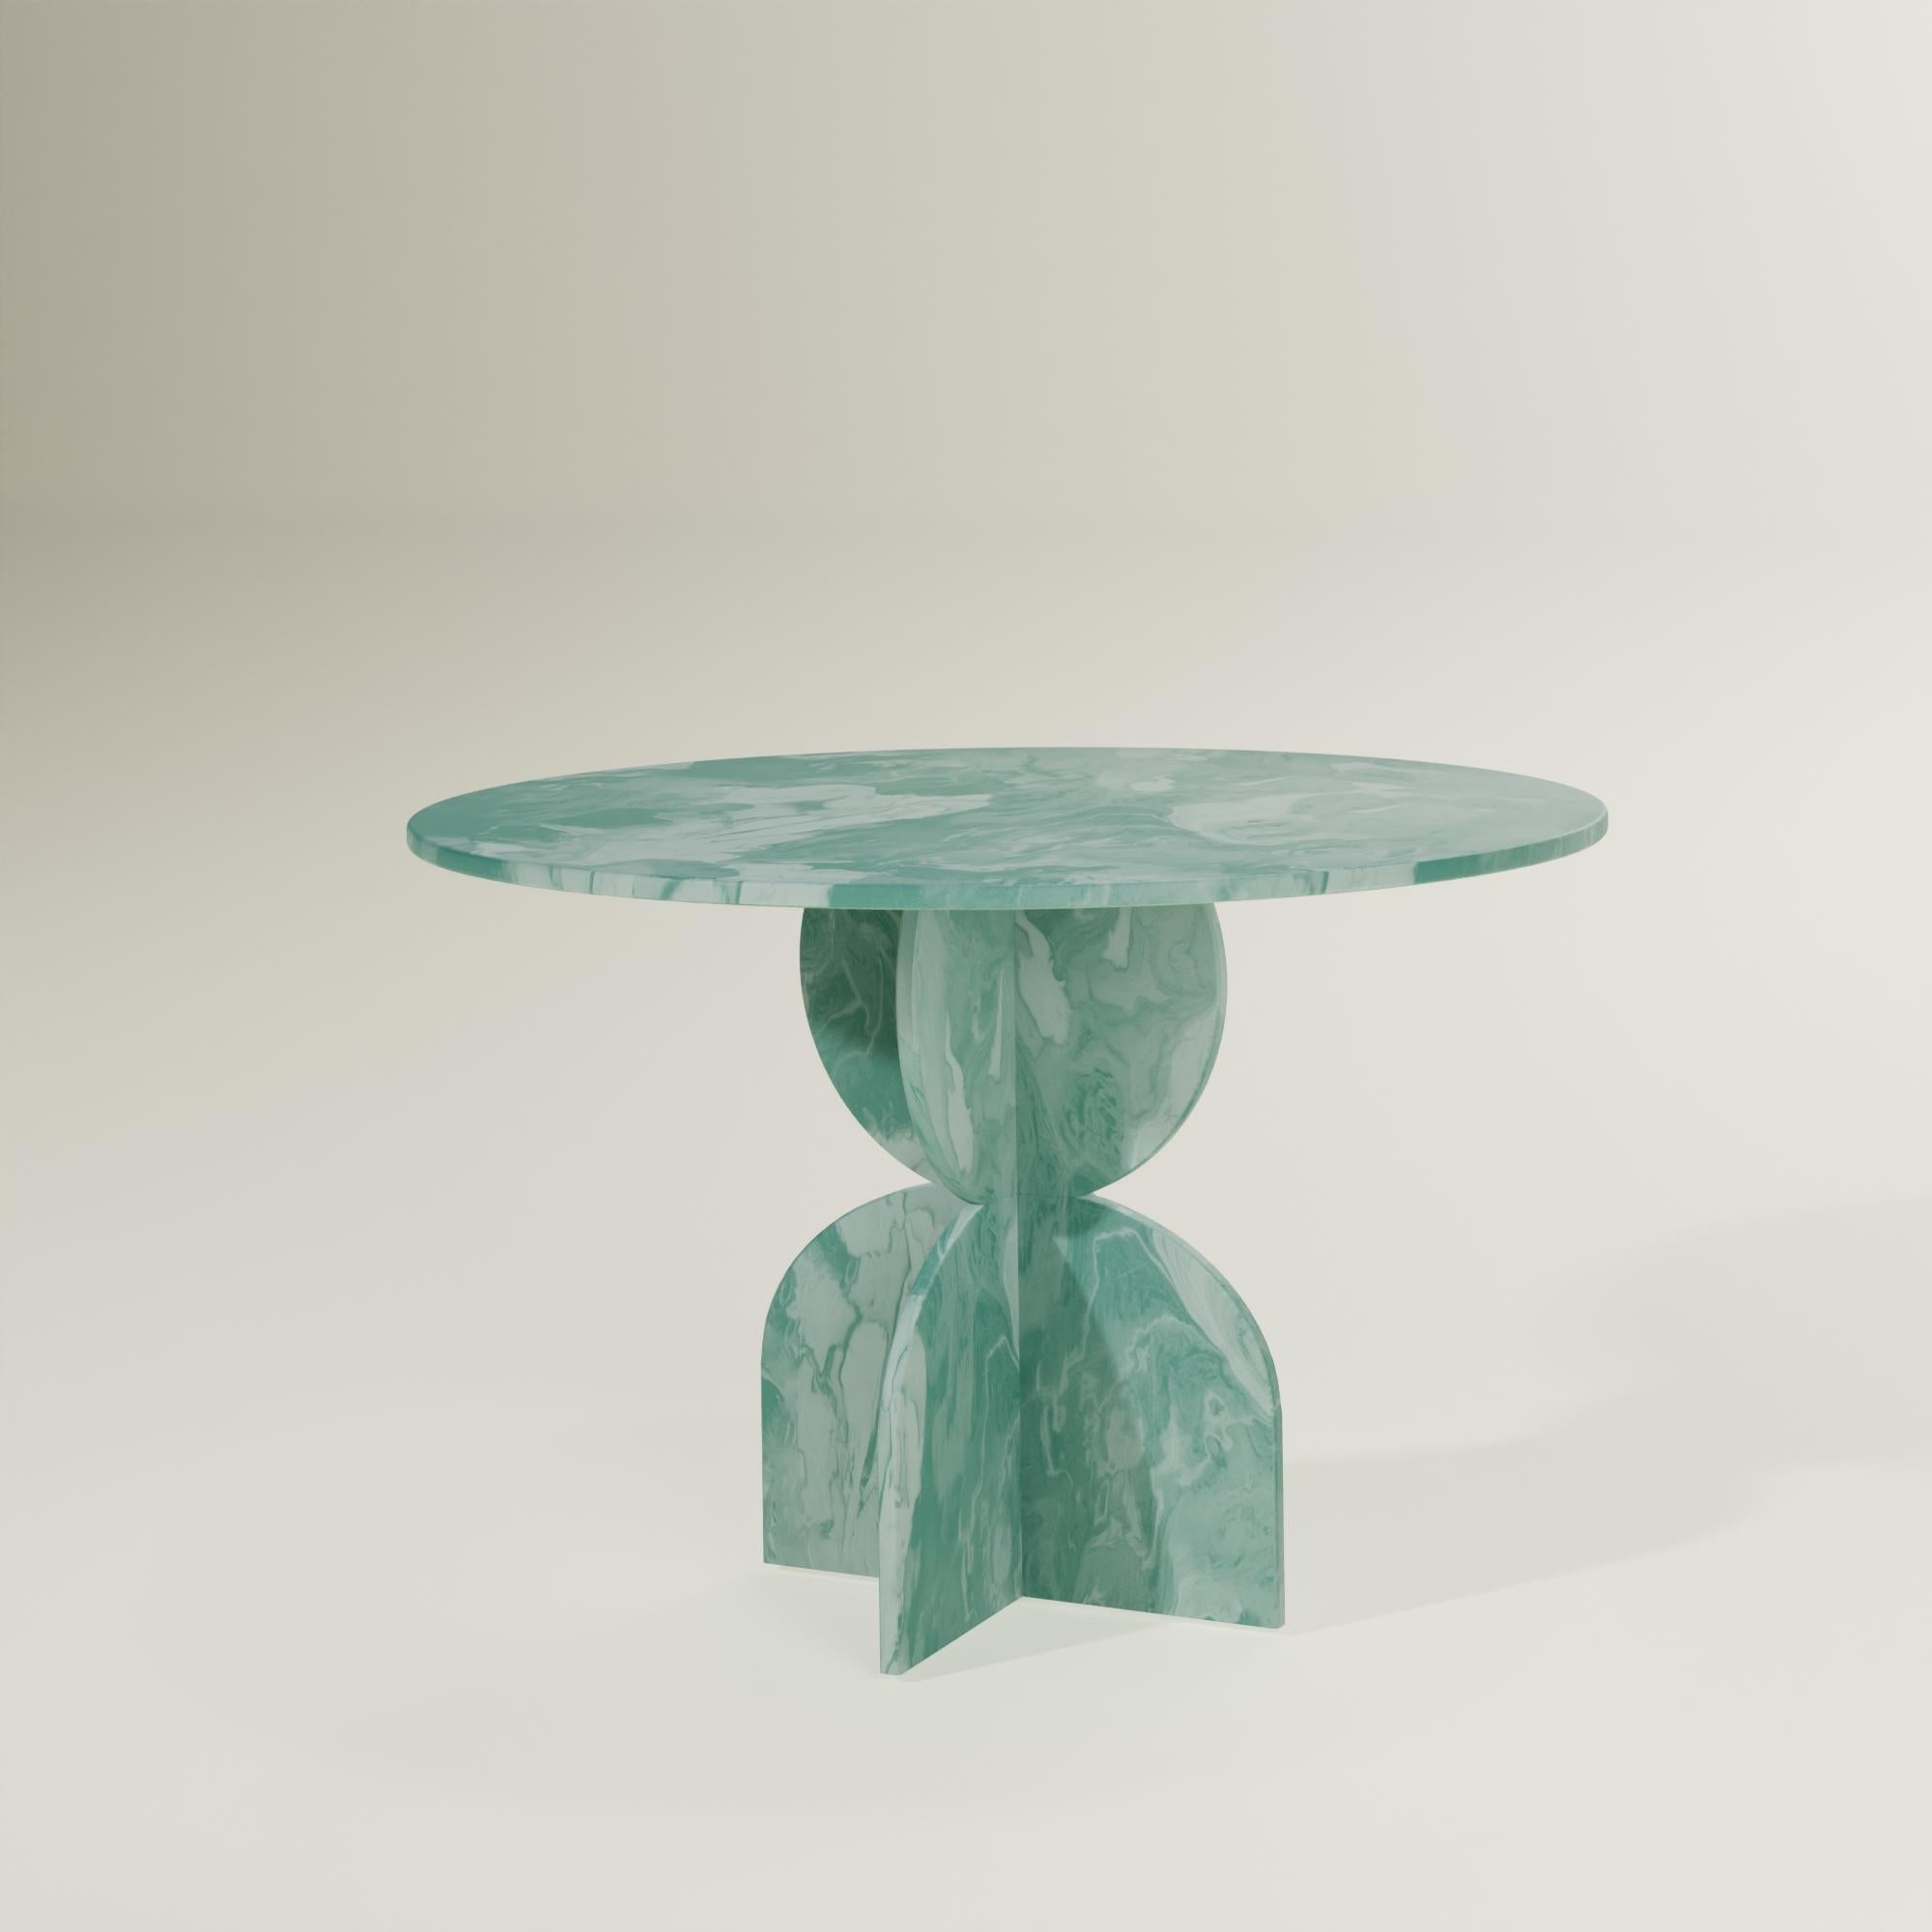 Contemporary Palm Green round table handcrafted 100% Recycled Plastic by Anqa Studios
Incredible conversations happen around incredible tables. ANQA Studios round table is a geometrically shaped table with a design inspired by the brutalist